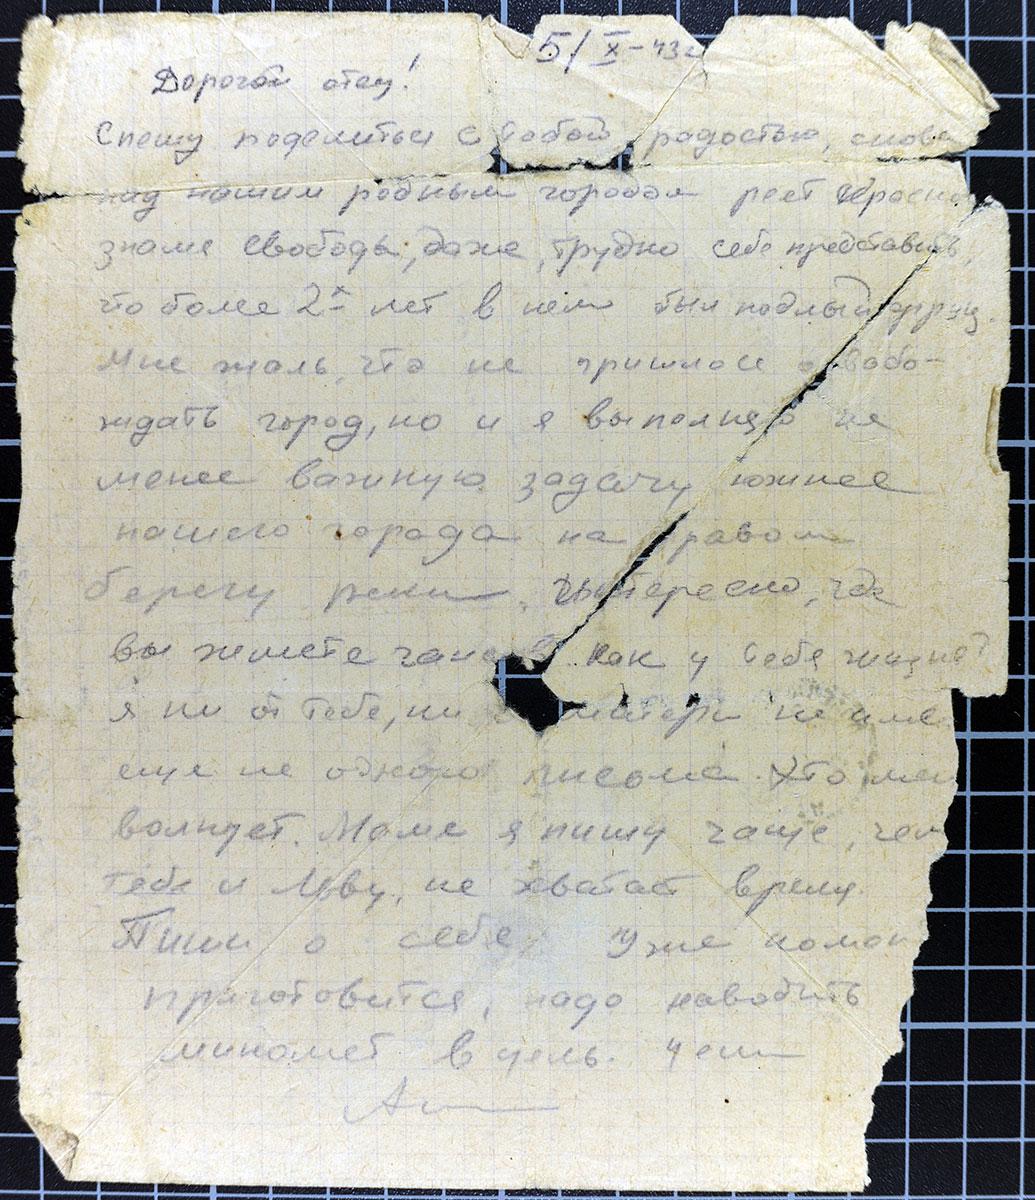 Anatoly's last letter to his parents, 5 October 1943